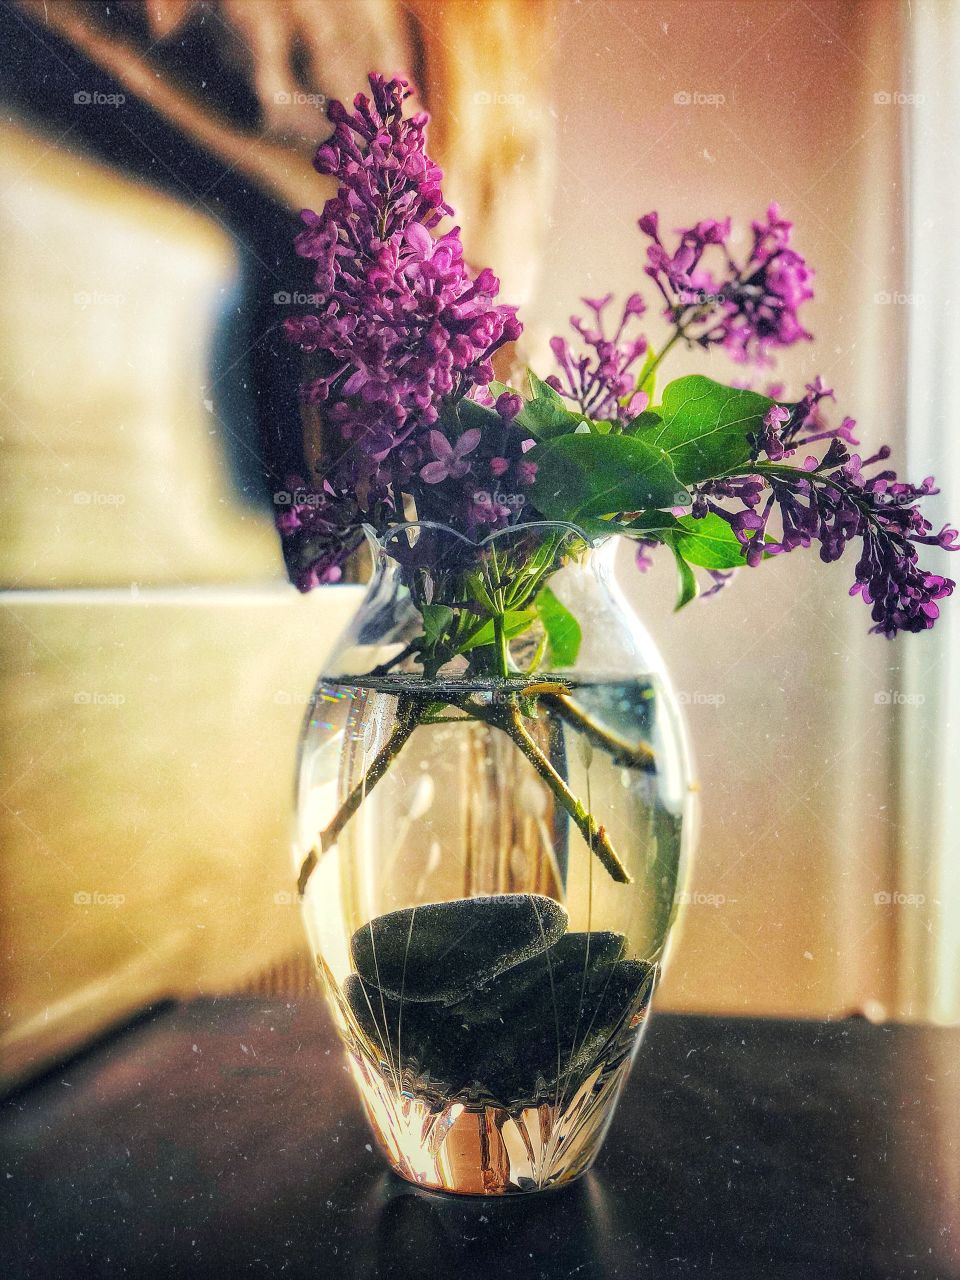 Lovely lilacs in a glass vase filled with rocks, shimmering light behind